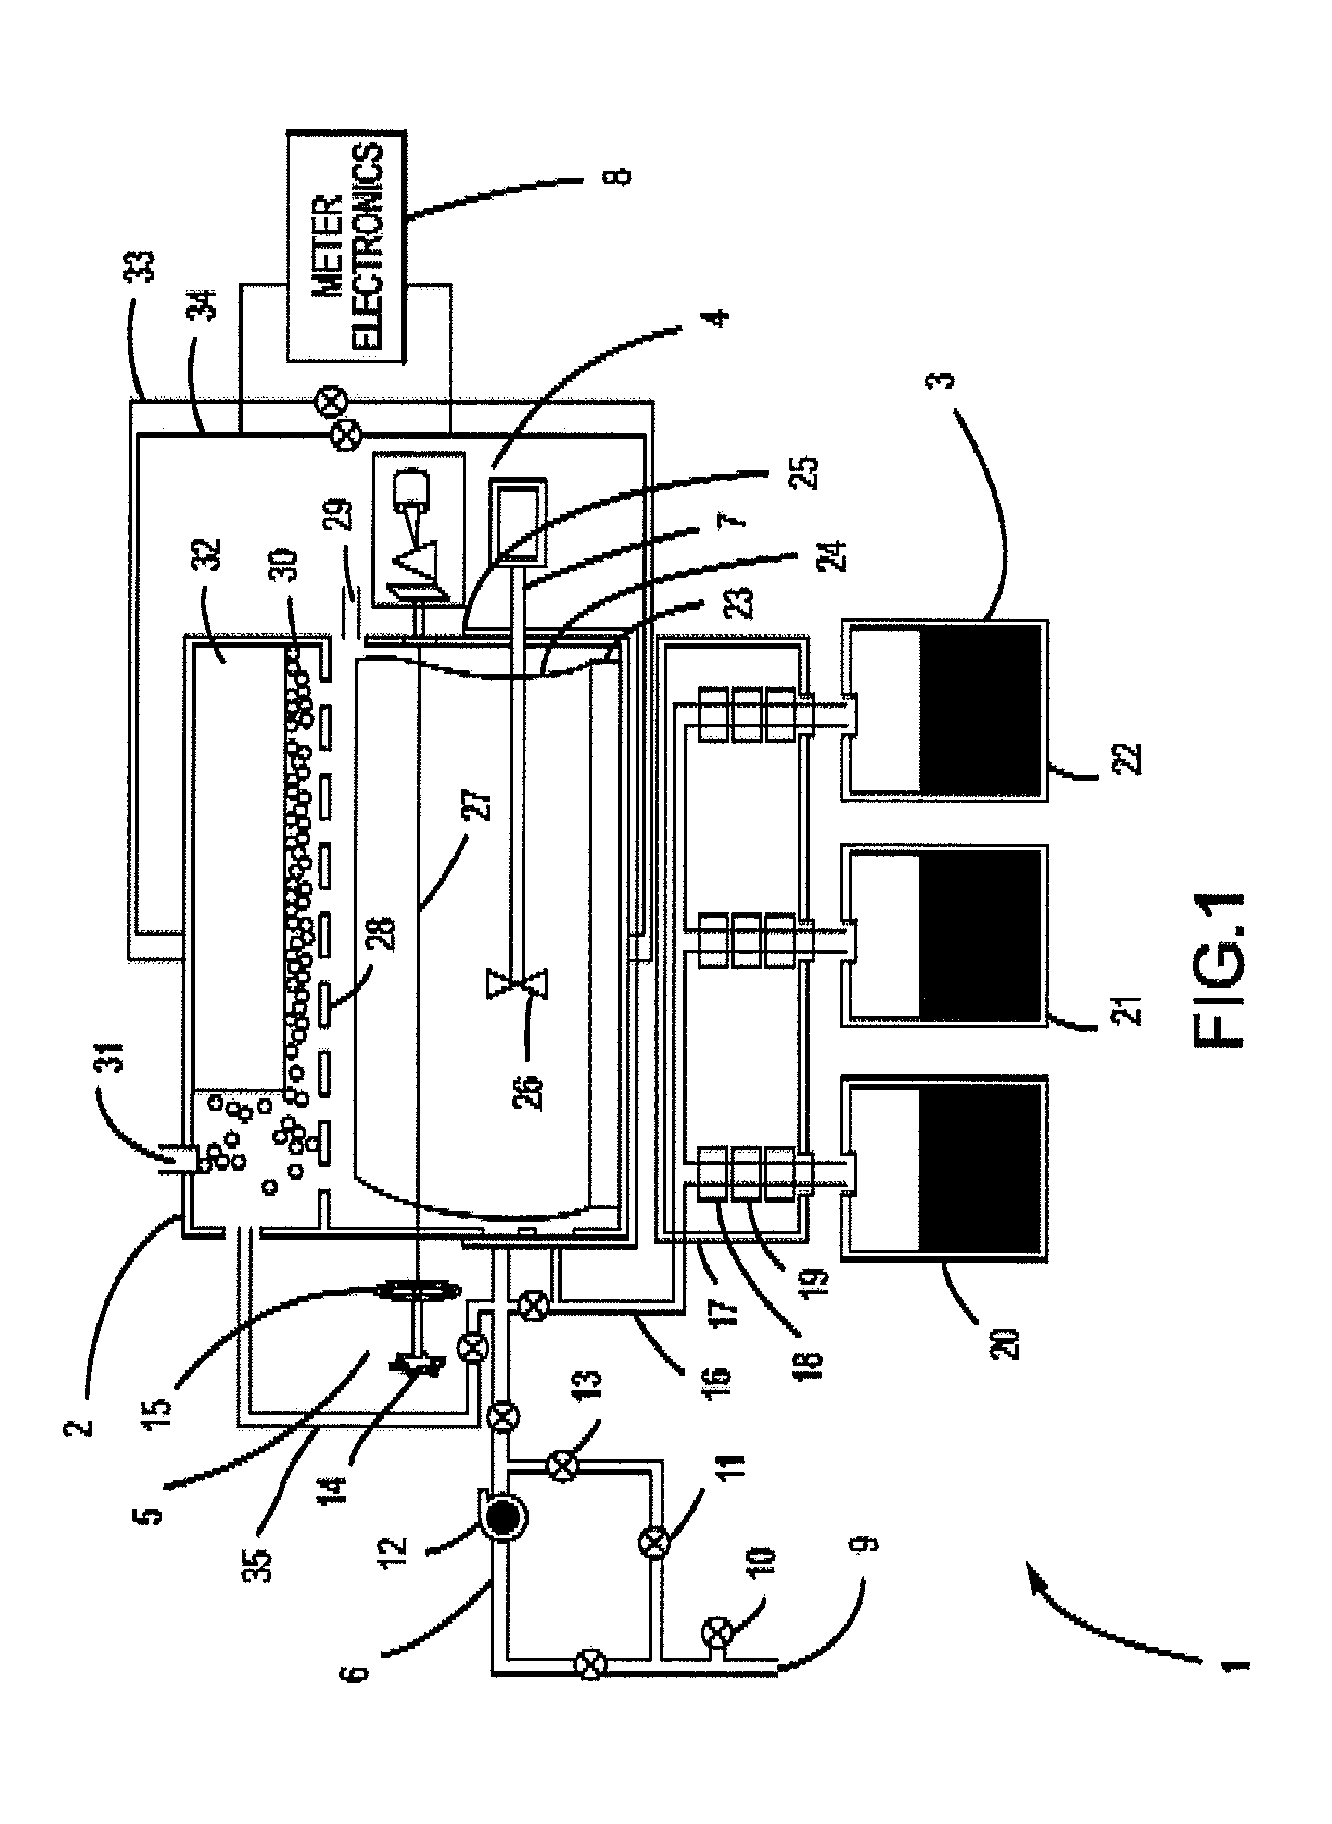 Apparatus, composition and method for determination of chemical oxidation demand